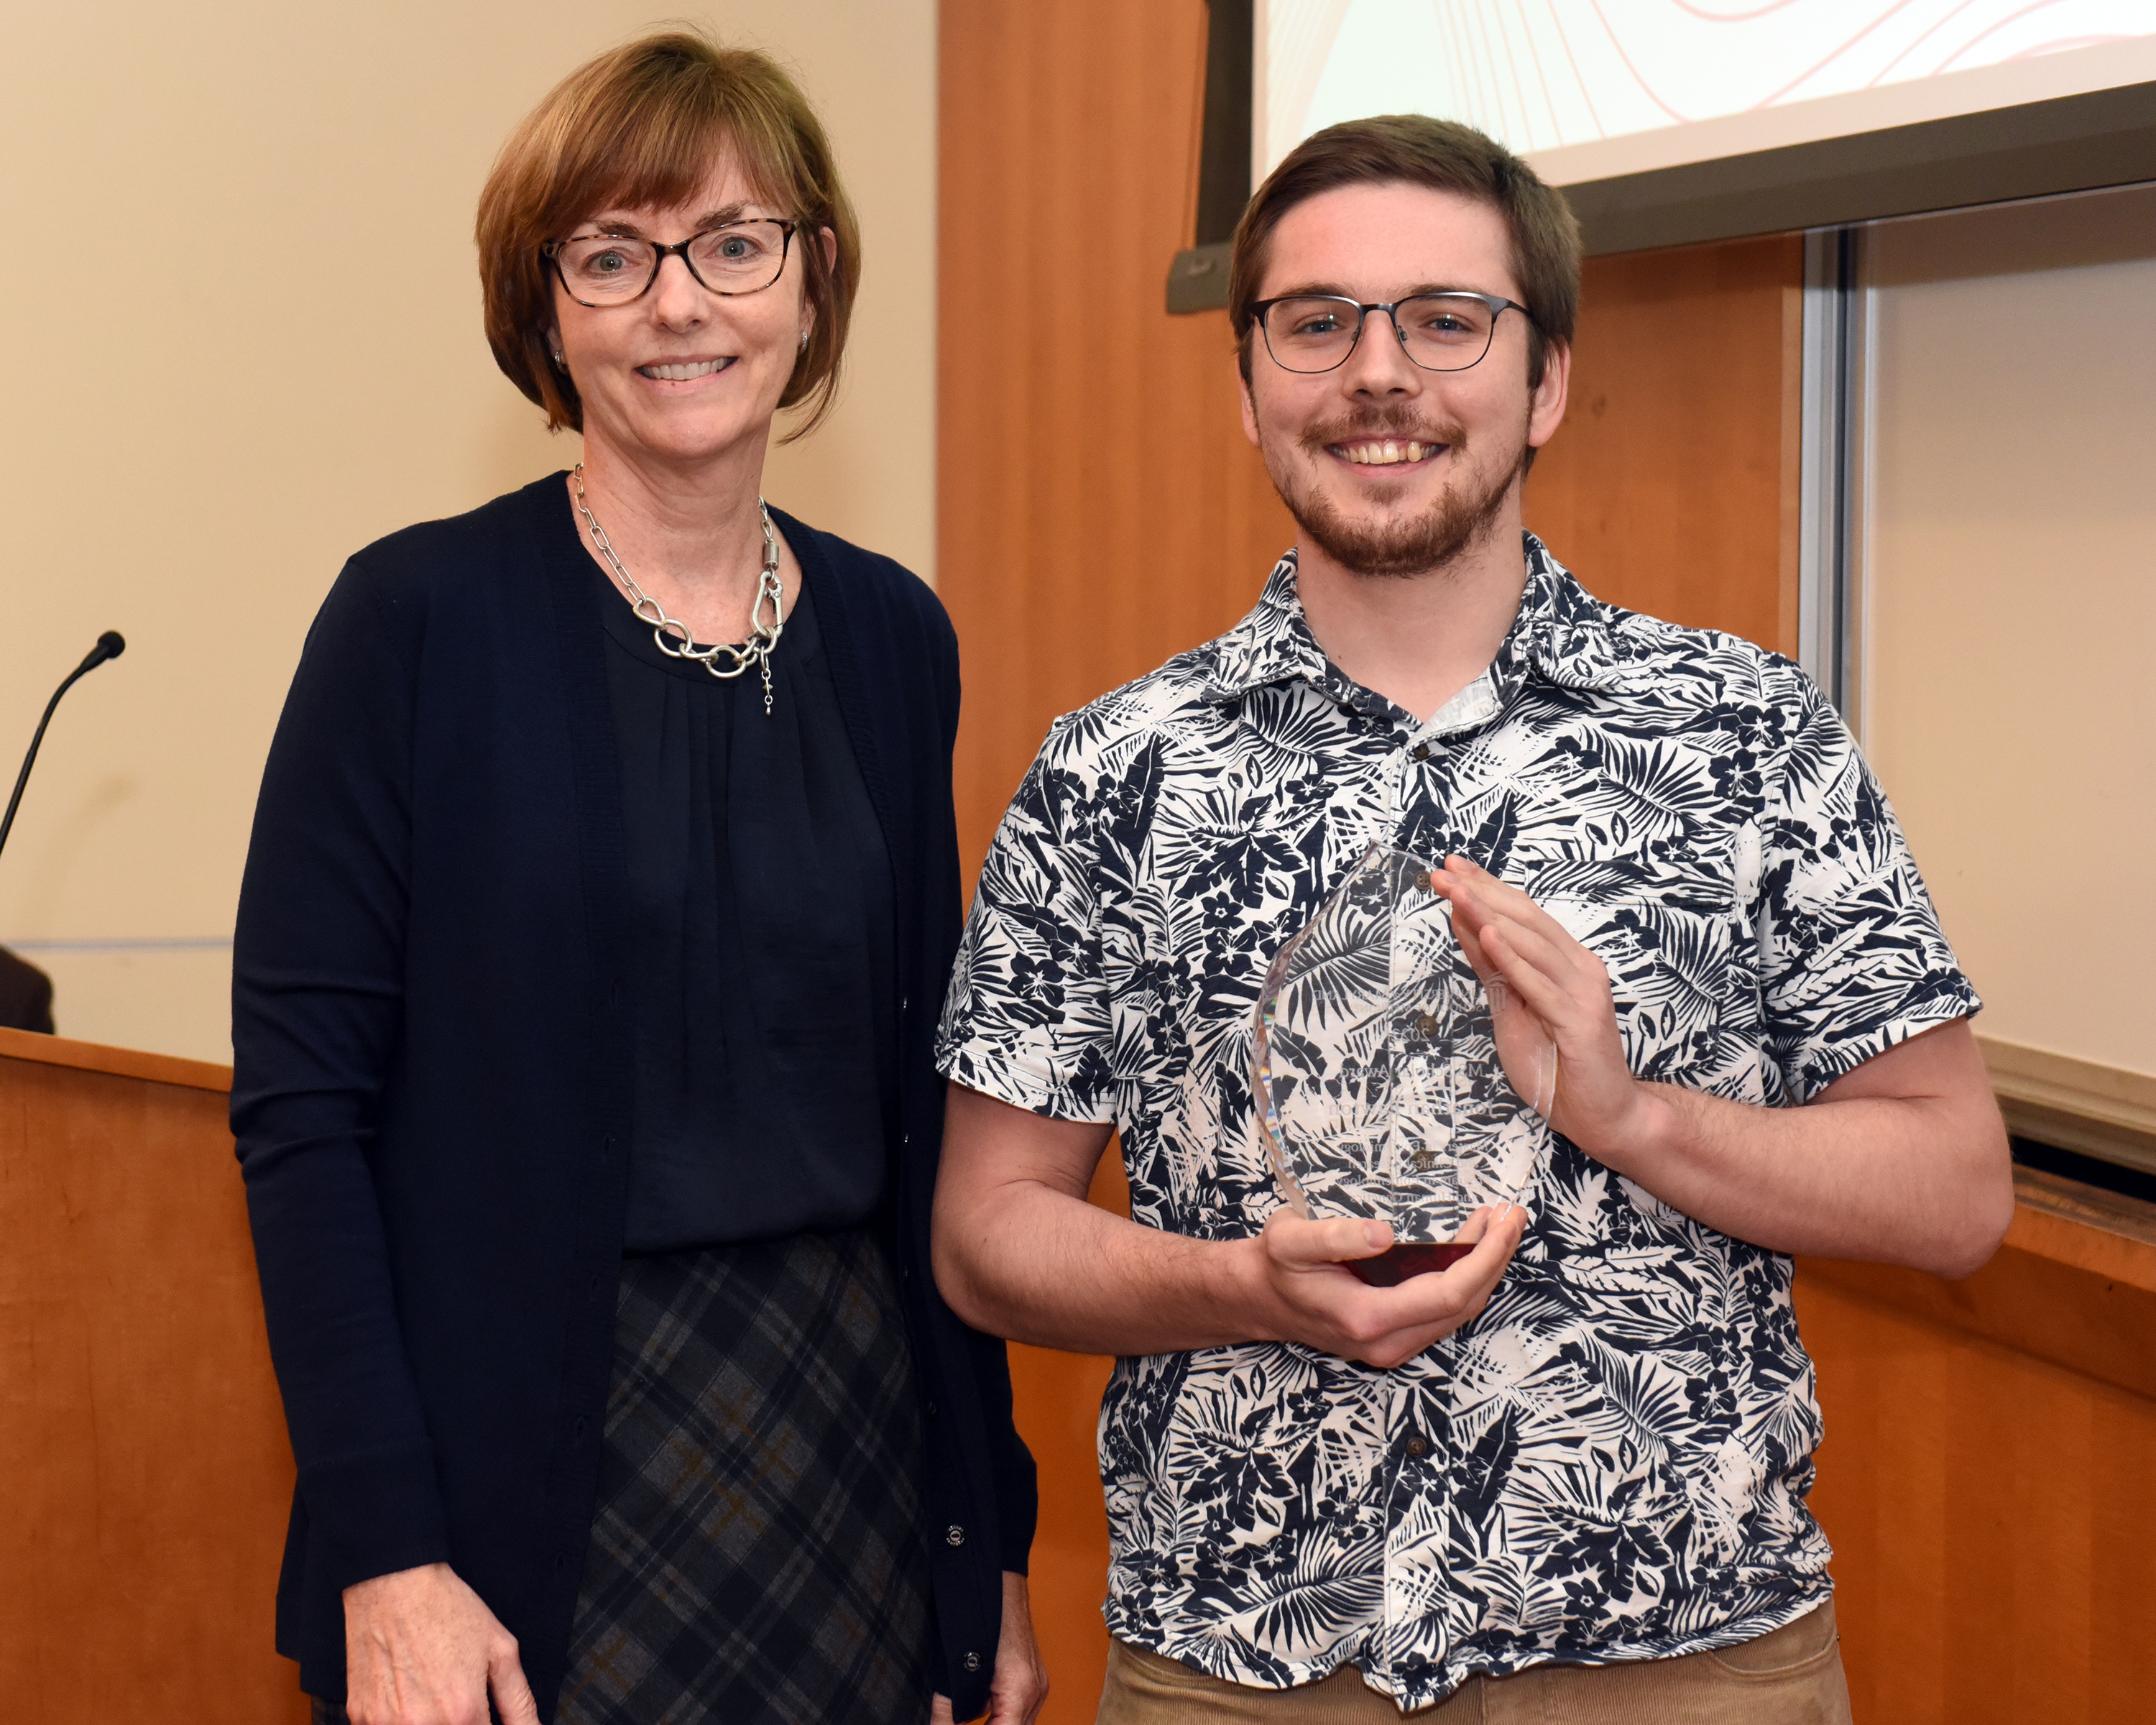 Dr. Eileen Barry is a white woman with short brown hair smiling wearing a black cardigan, blouse, and skirt standing next to Jonathan Lawton, a white man with brown hair, glasses, and a beard, wearing a black and white floral shirt. He is holding his award.